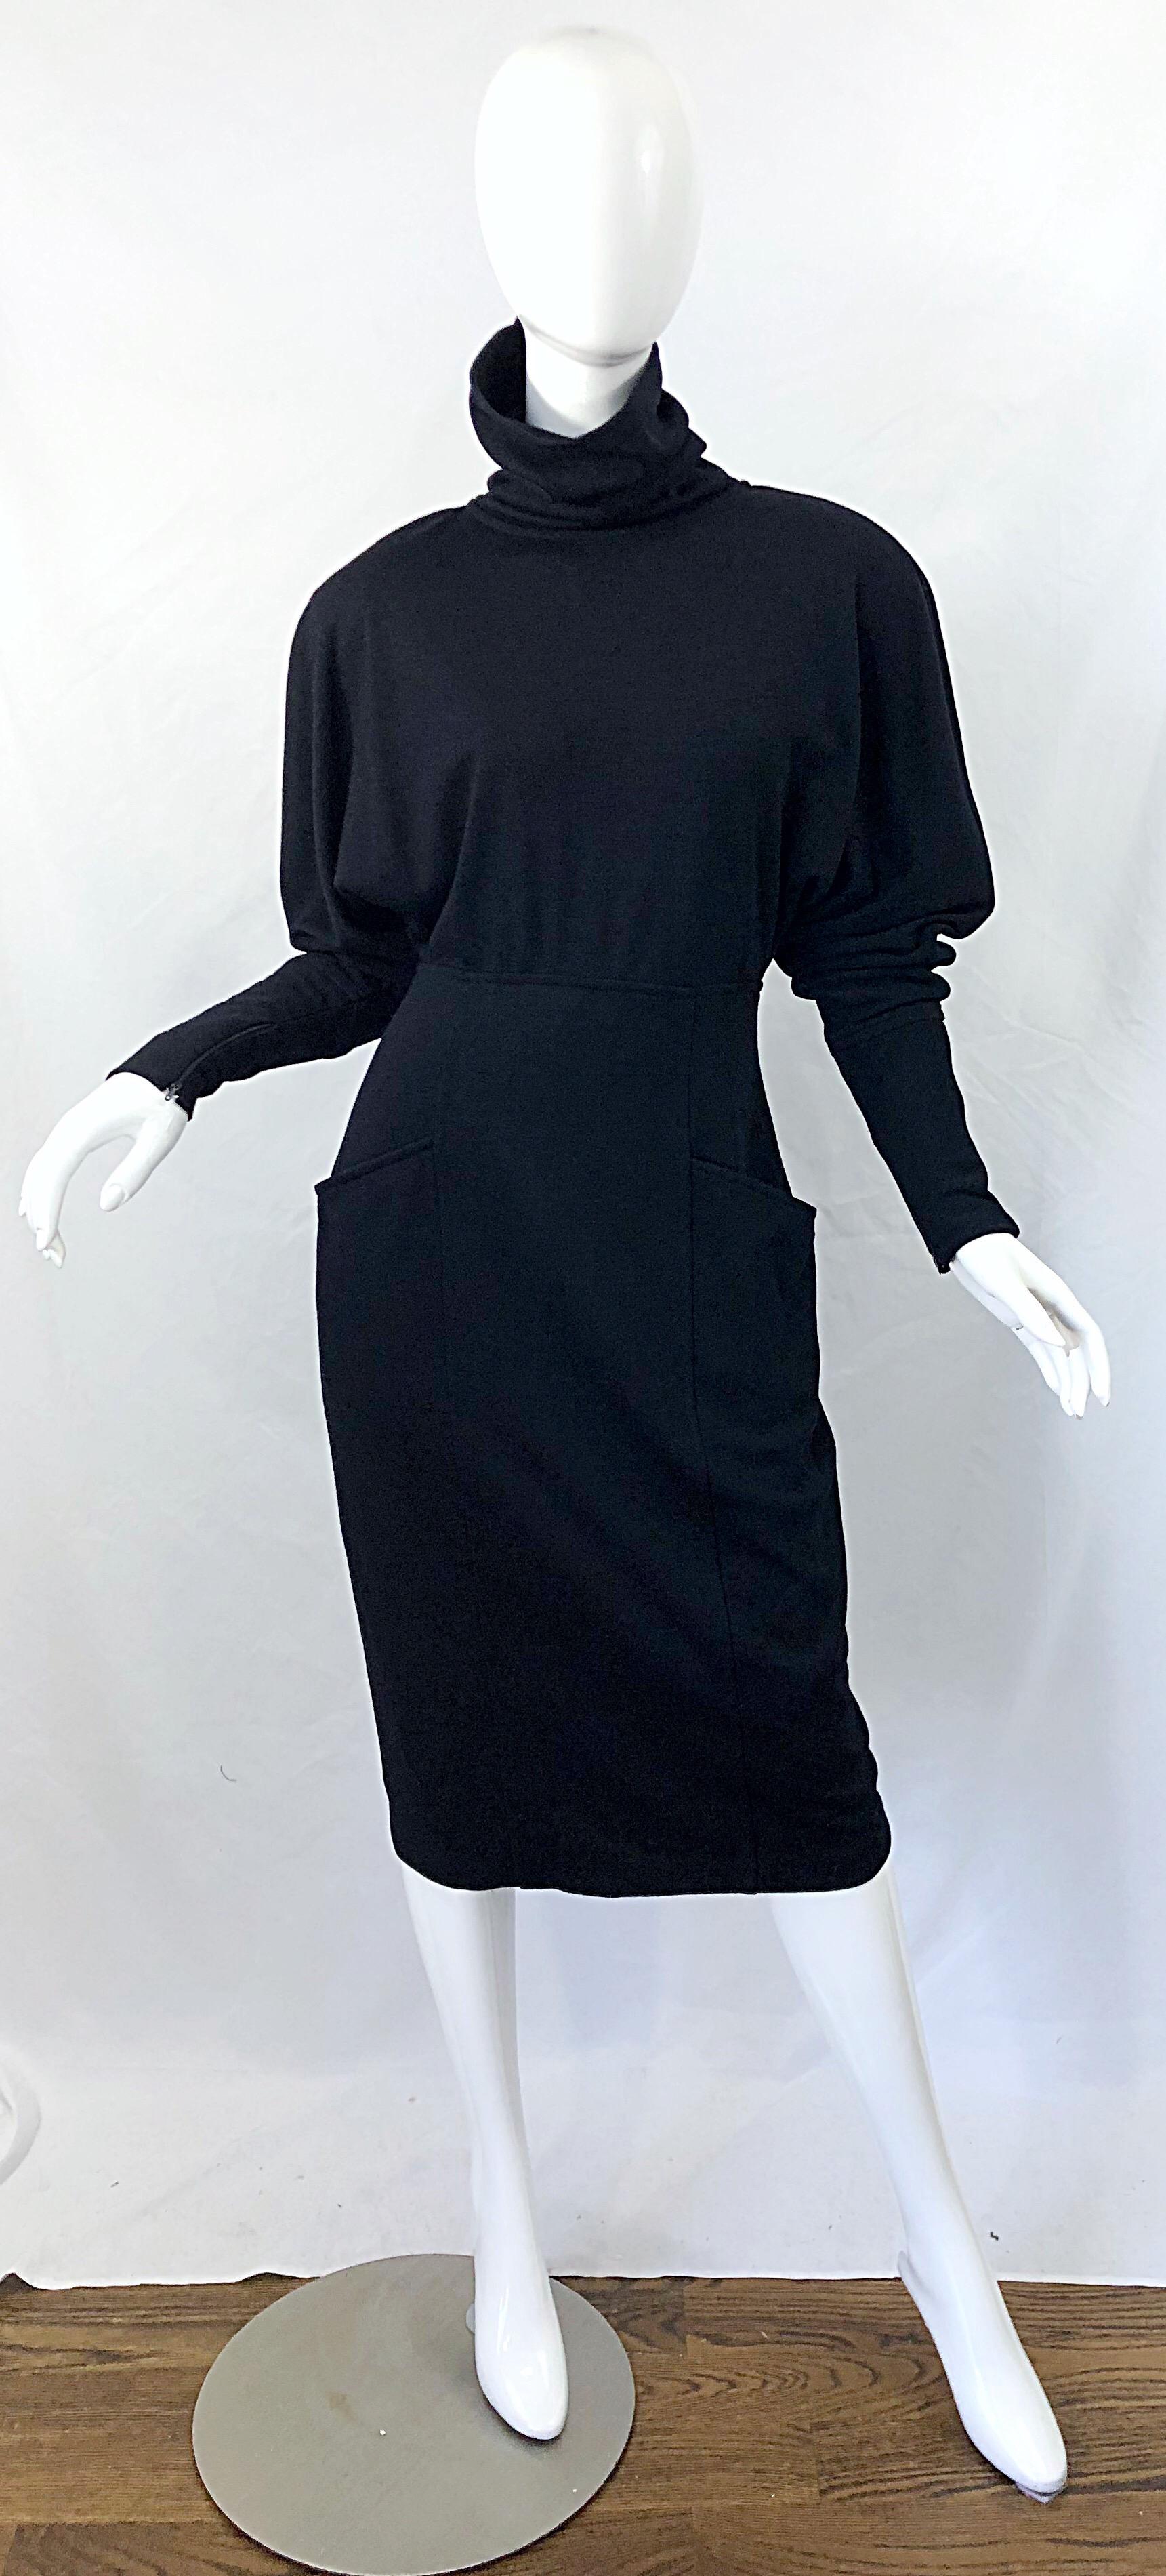 Avant Garde GUCCI 1980s black wool turtleneck dolman sleeve wool sweater dress ! Features the softest wool, with buttons up the back bodice, and zipper up the back skirt. Two pockets at each side of the hips. Can be worn so many different ways -